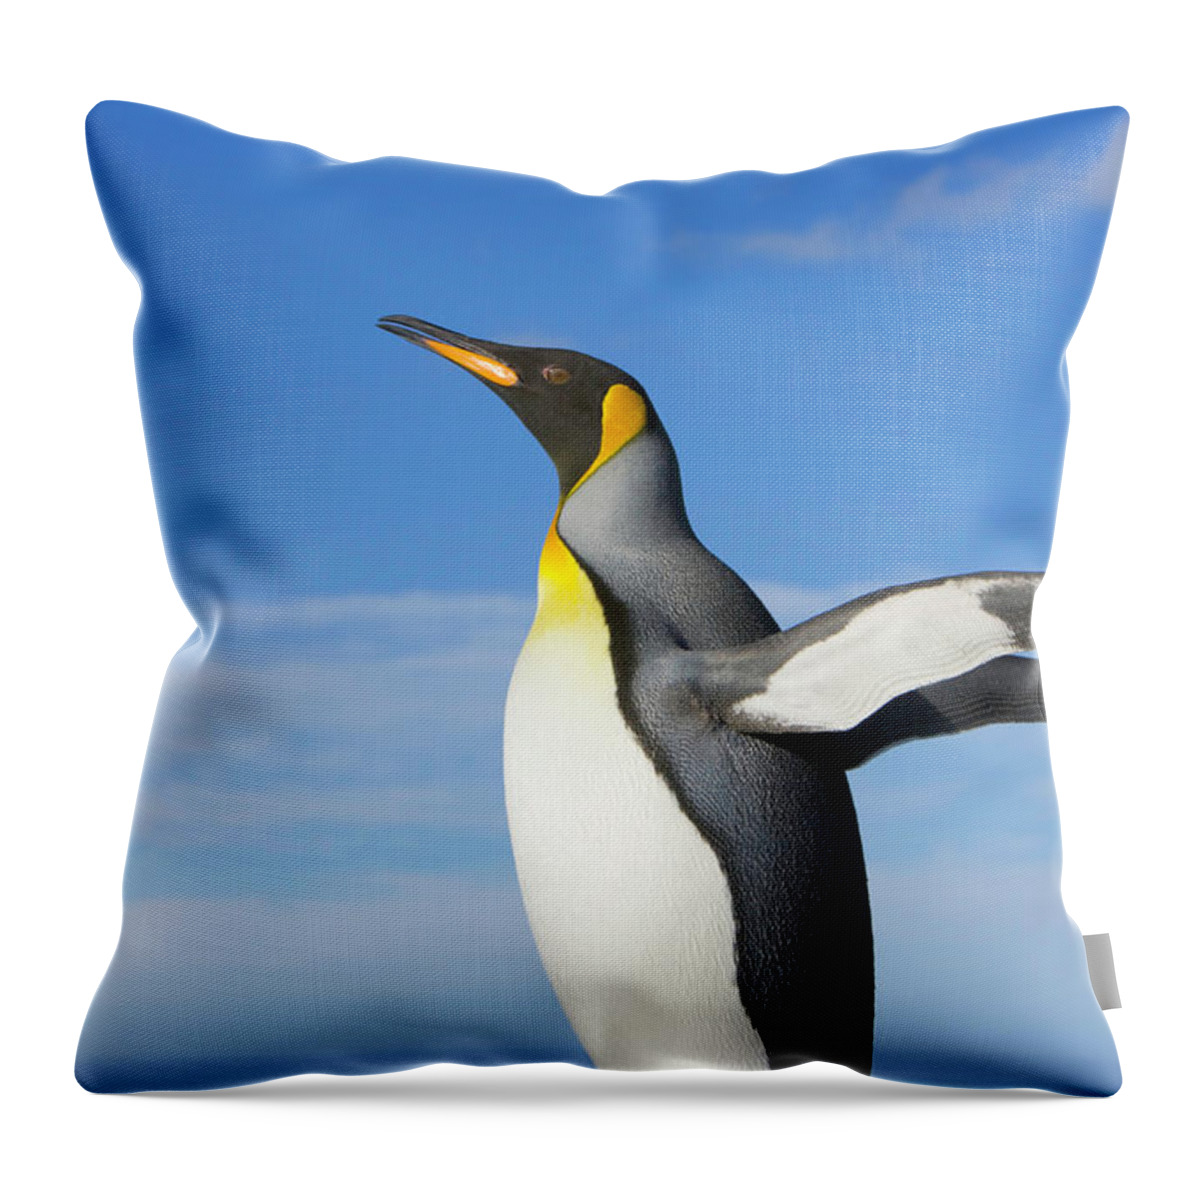 One Animal Throw Pillow featuring the photograph King Penguin Aptenodytes Patagonicus #1 by Eastcott Momatiuk